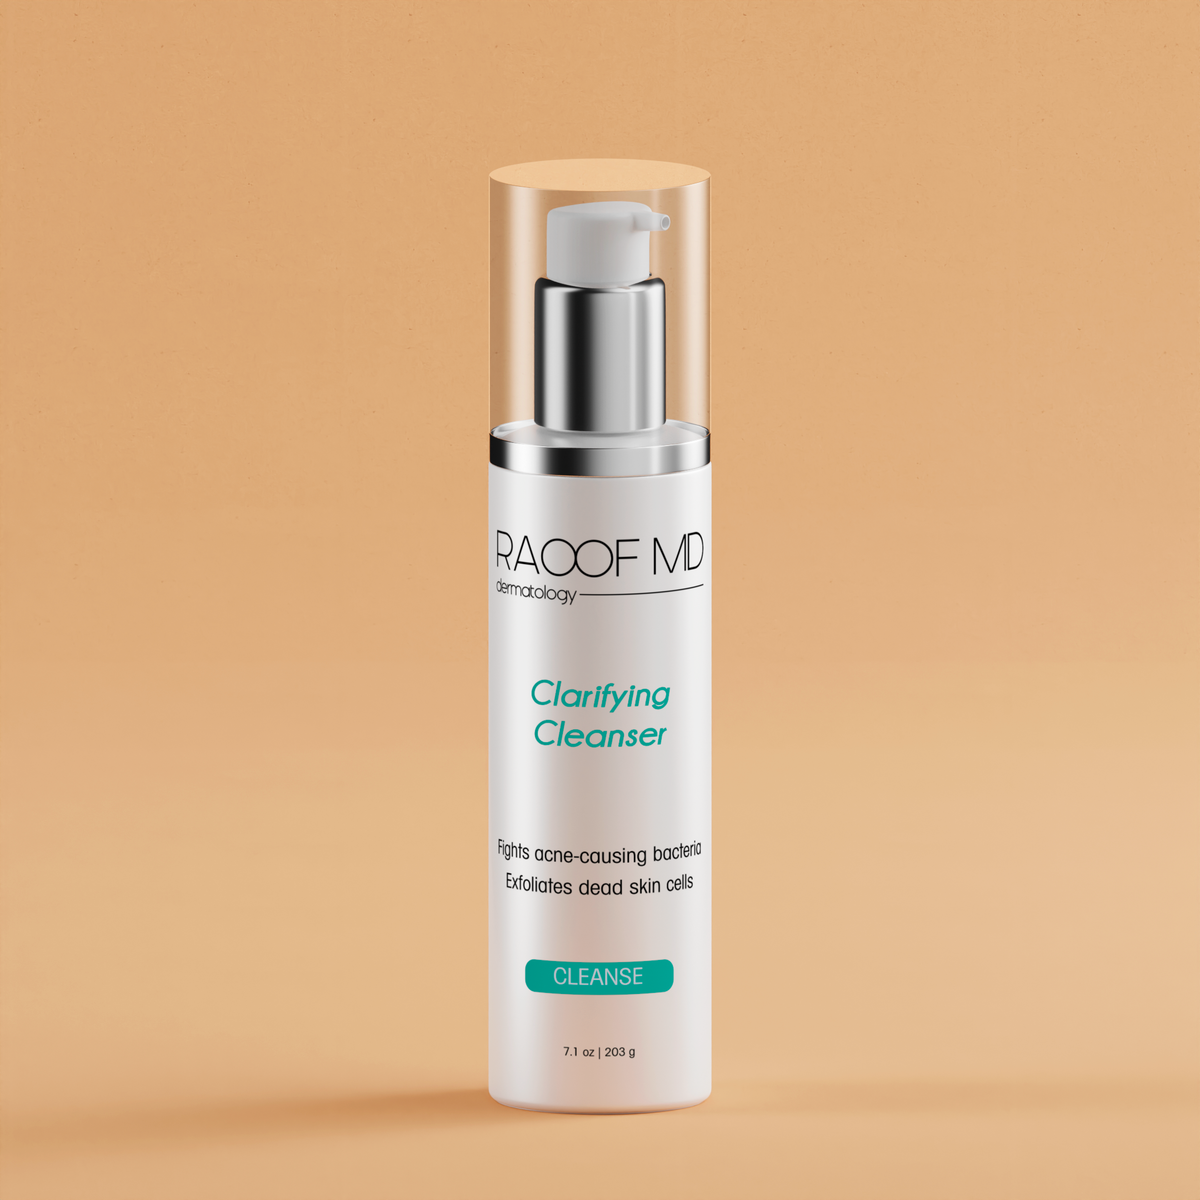 Clarifying Cleanser by RAOOF MD dermatology